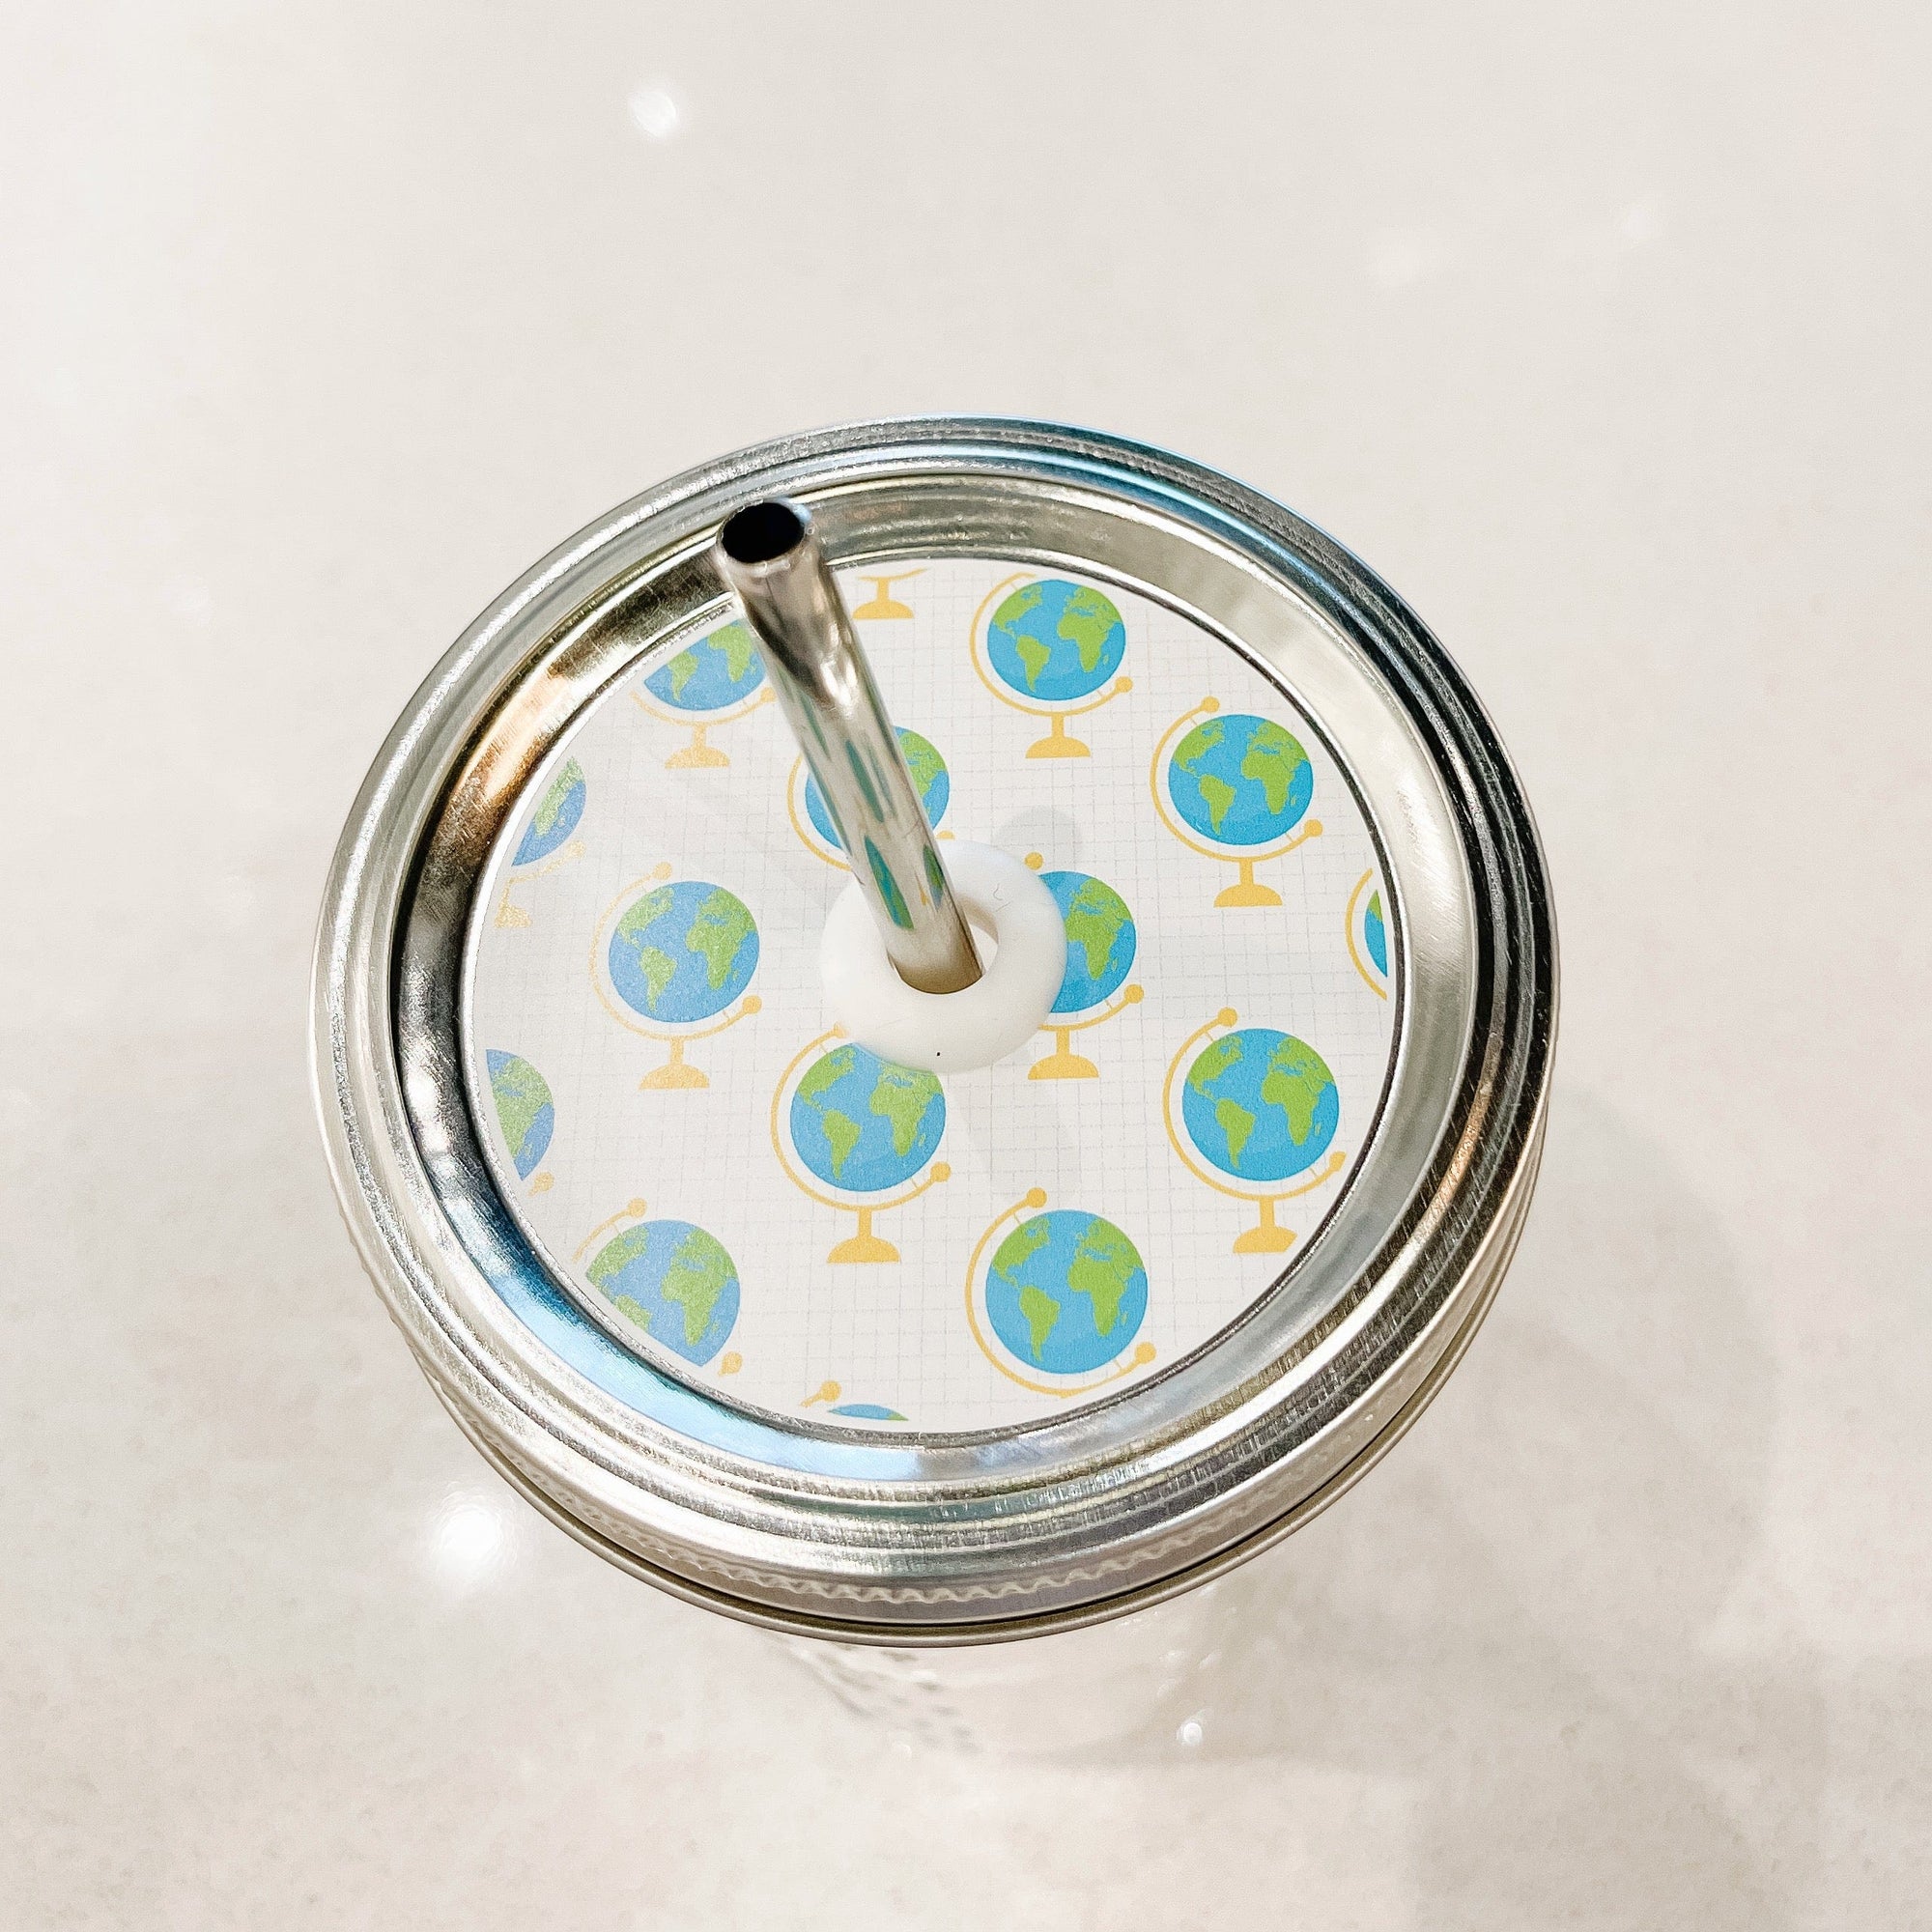 Silver lid with a globes on graph paper patterned mason jar straw lid against a white background.